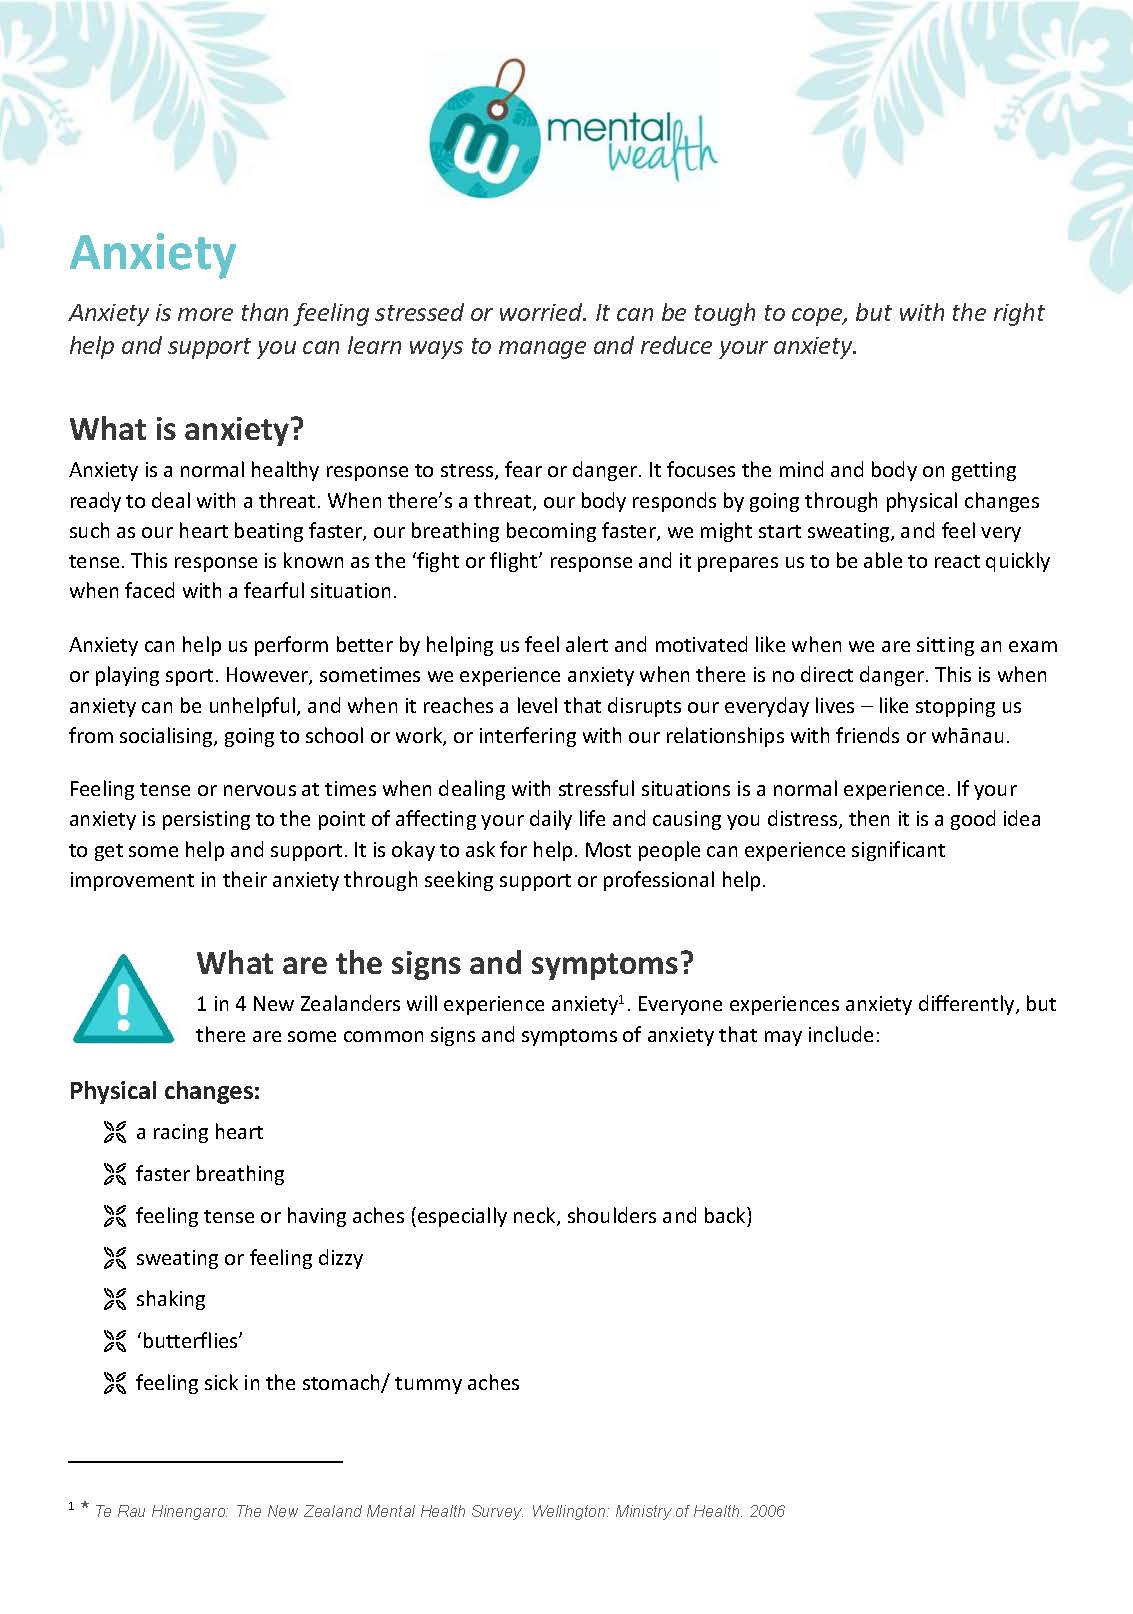 Anxiety fact sheet cover